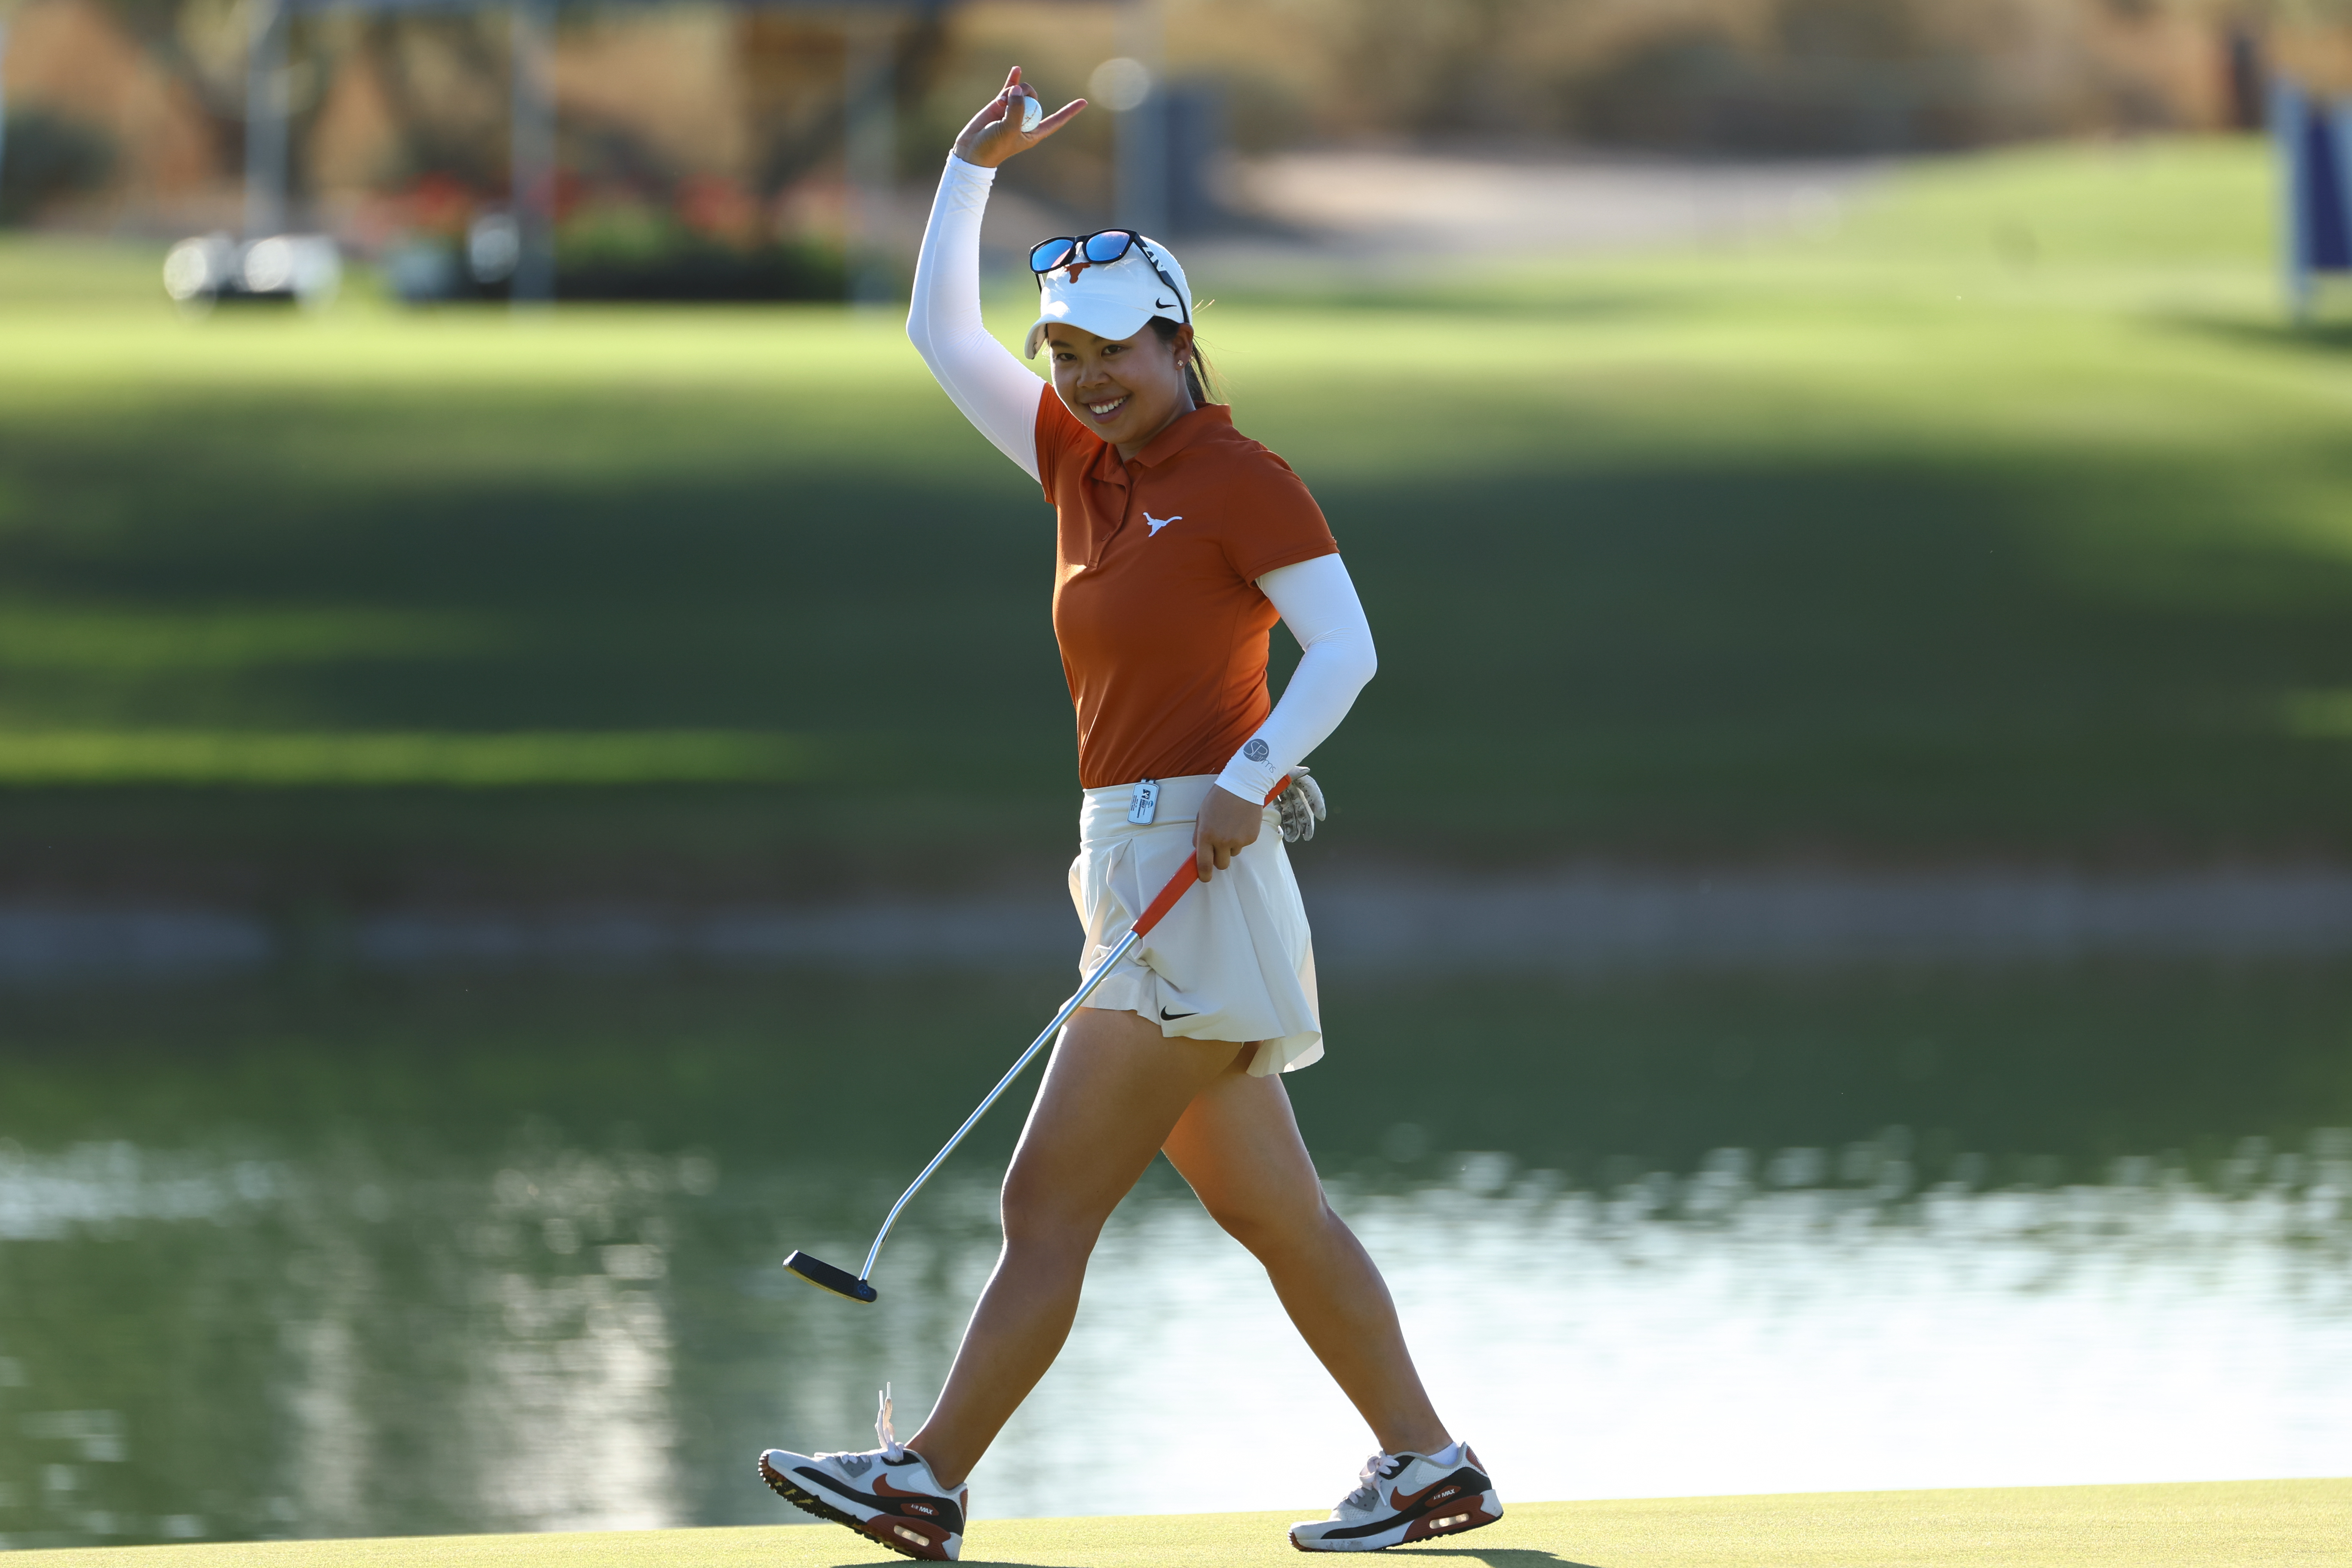 Our favorite looks from the DI women's golf championship